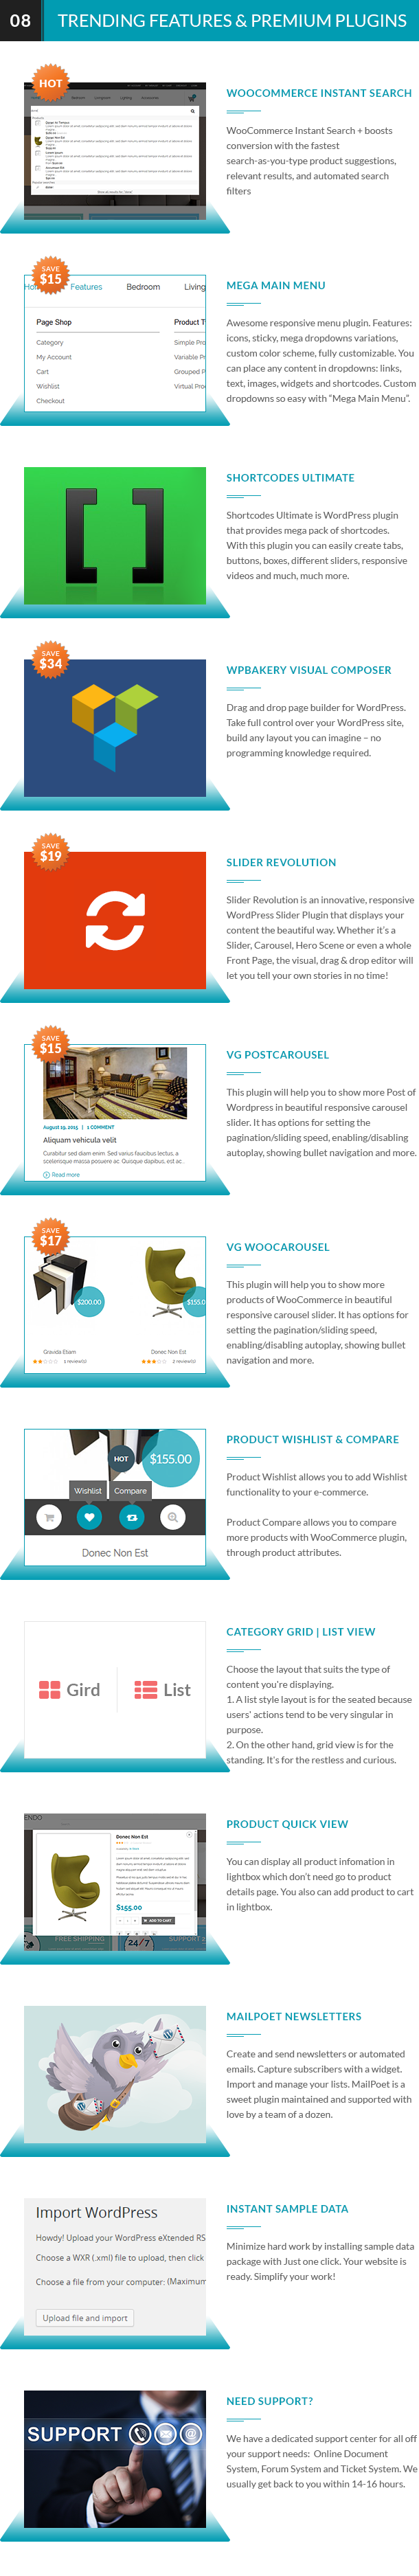 VG Cendo - WooCommerce WordPress Theme for Furniture Stores - 28